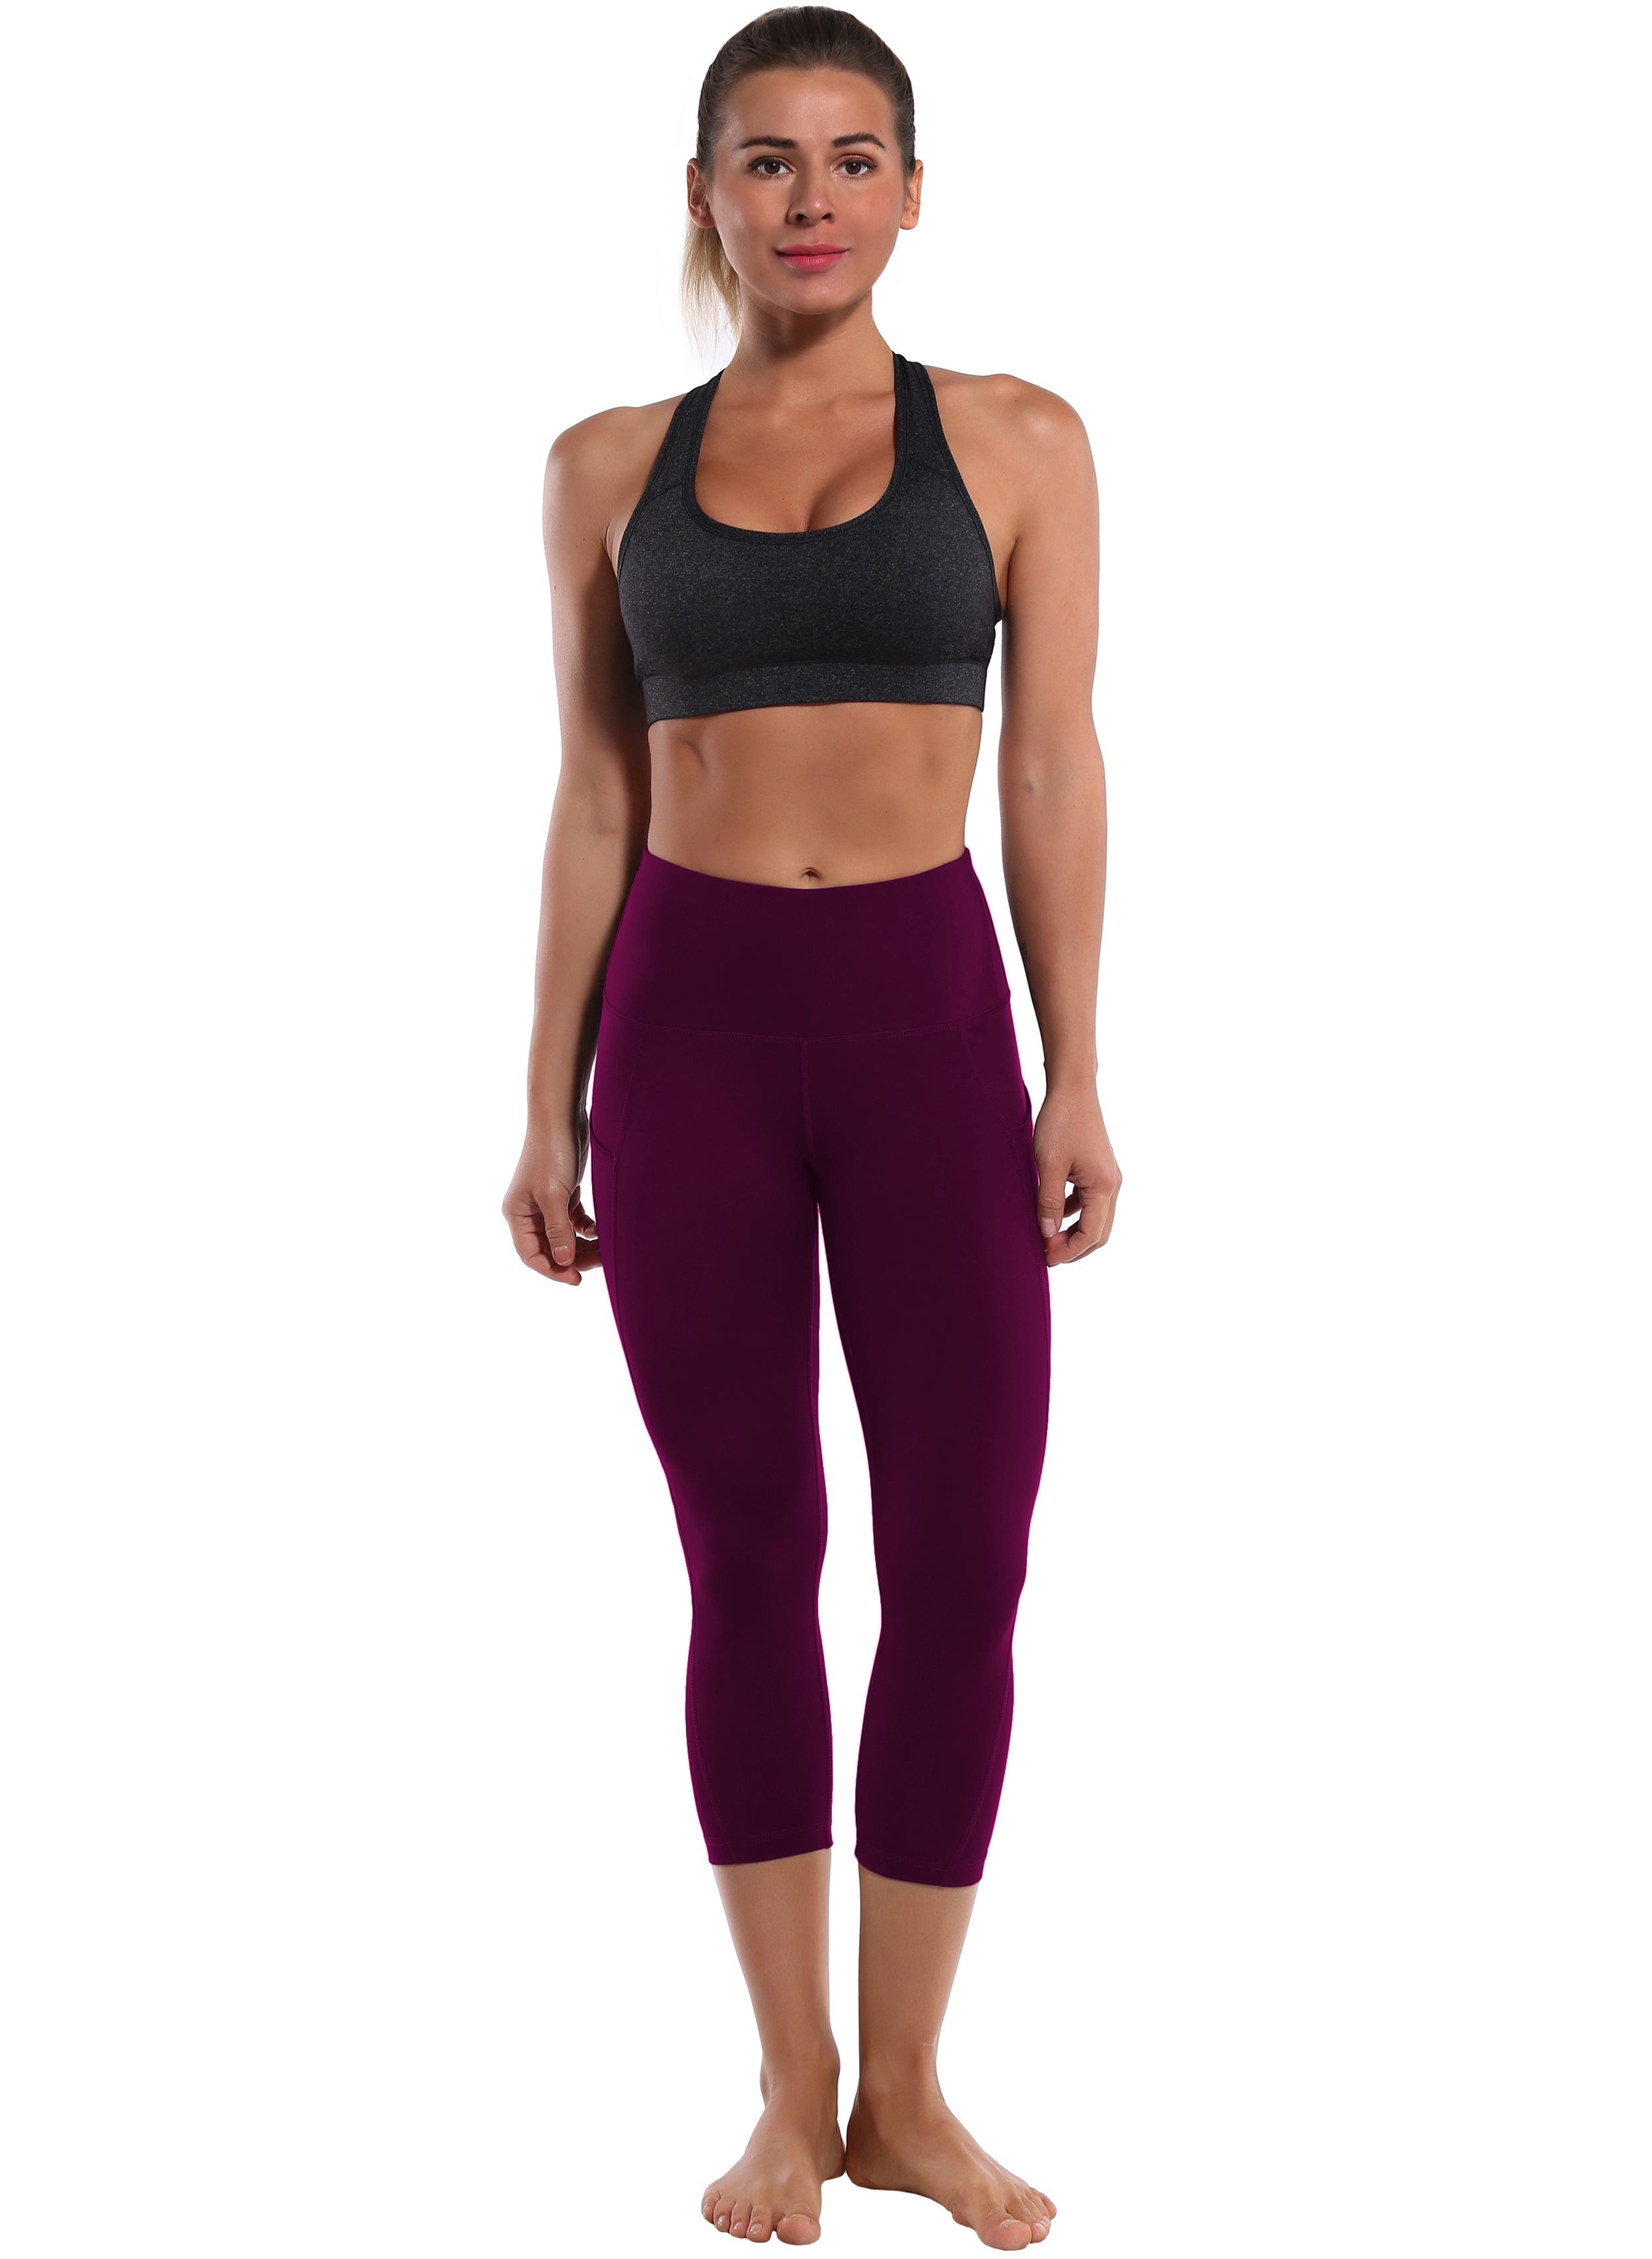 19" High Waist Side Pockets Capris grapevine 75%Nylon/25%Spandex Fabric doesn't attract lint easily 4-way stretch No see-through Moisture-wicking Tummy control Inner pocket